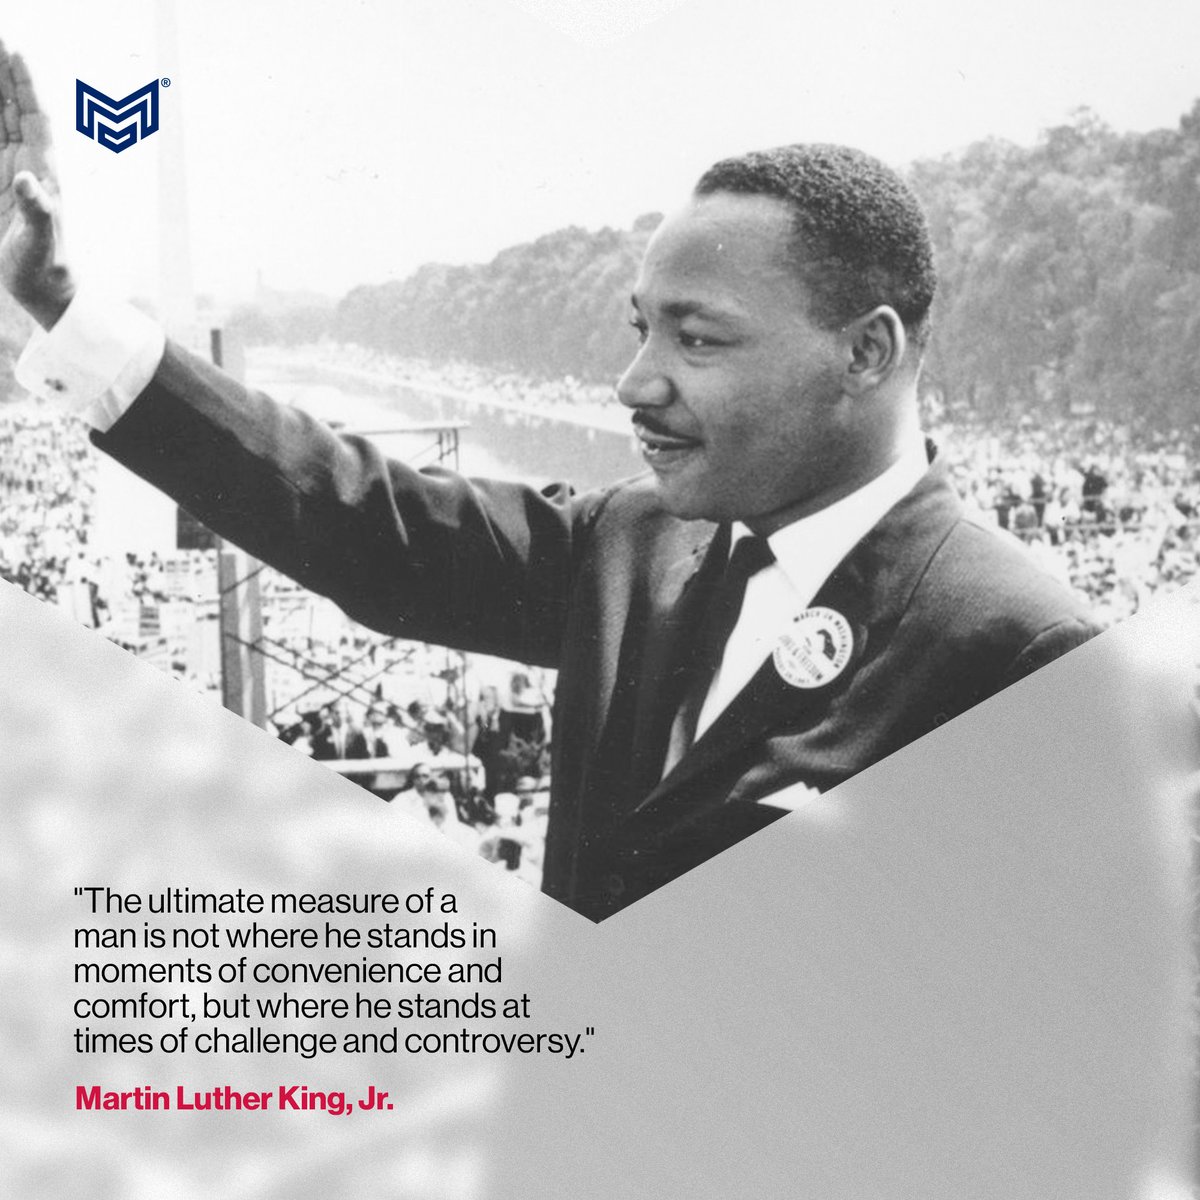 A person's worth manifests itself in bad times, when he must test his beliefs and abilities.

#WhatsYourDream #MLKday ✊🏿

#MrUrbina #usa #southamerica #entrepreneurs #companies #mybusiness #business #businesses #services #foryourbusiness